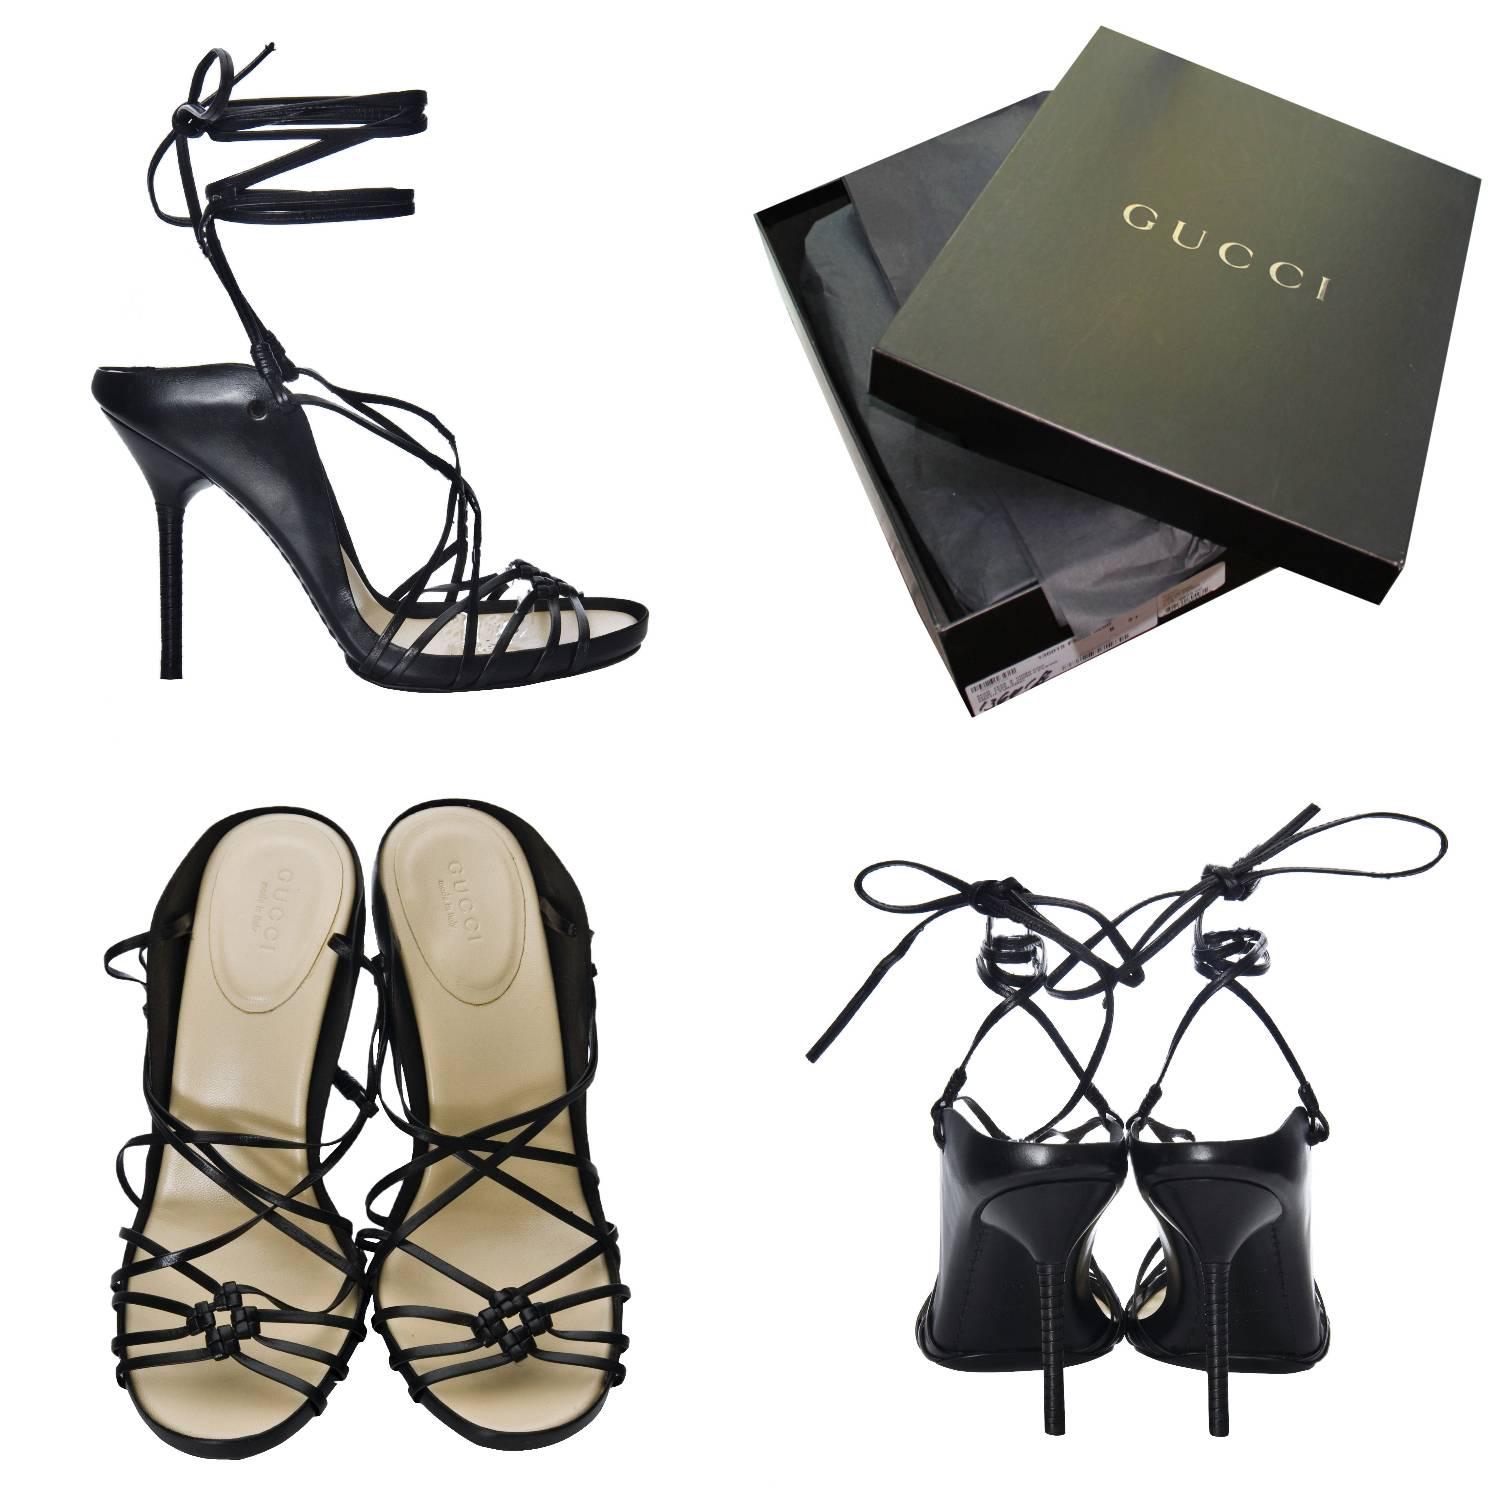 Tom Ford for Gucci Heels 
Worn Once
* Stunning in Black Leather
* European Size: 38
* Batwing Sides
* Criss Cross Leather Top
* Leather Tie Ankle Straps
* Cream Leather Footbed
* 4.5